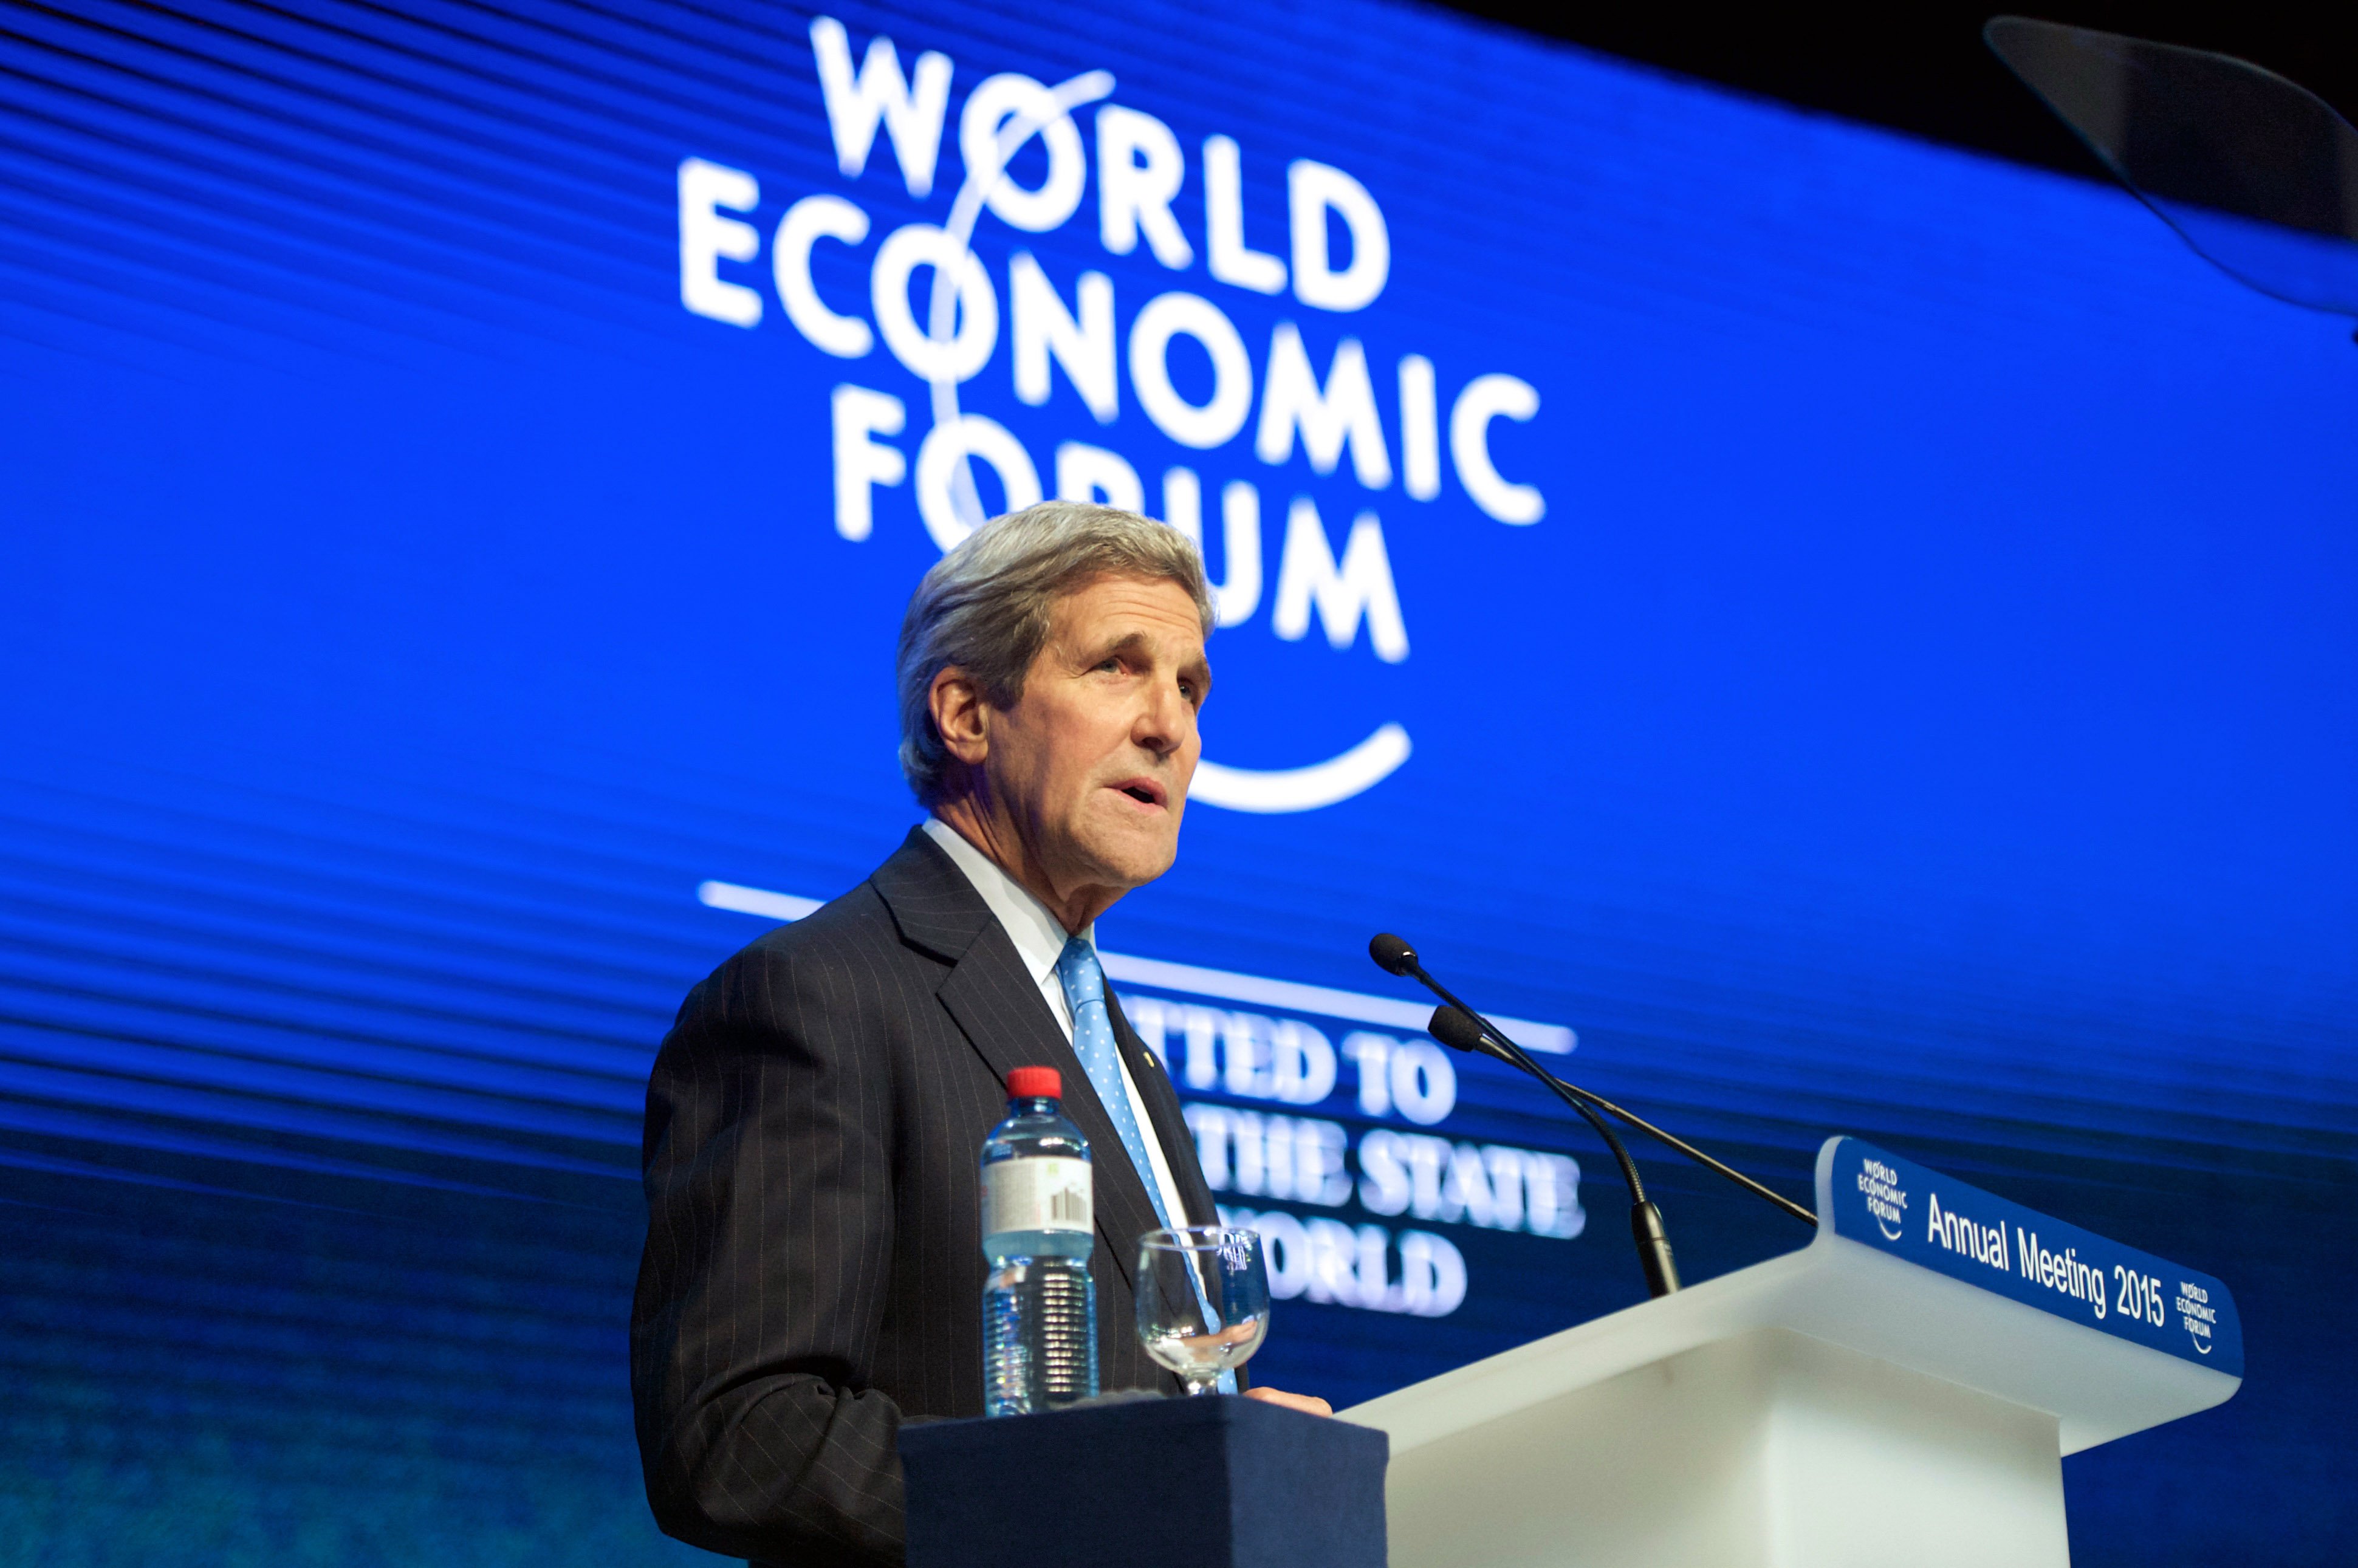 Secretary of State John Kerry delivers a speech about violent extremism to the audience at the World Economic Forum in Davos, Switzerland on Jan. 23, 2015. (Demotix/Corbis)